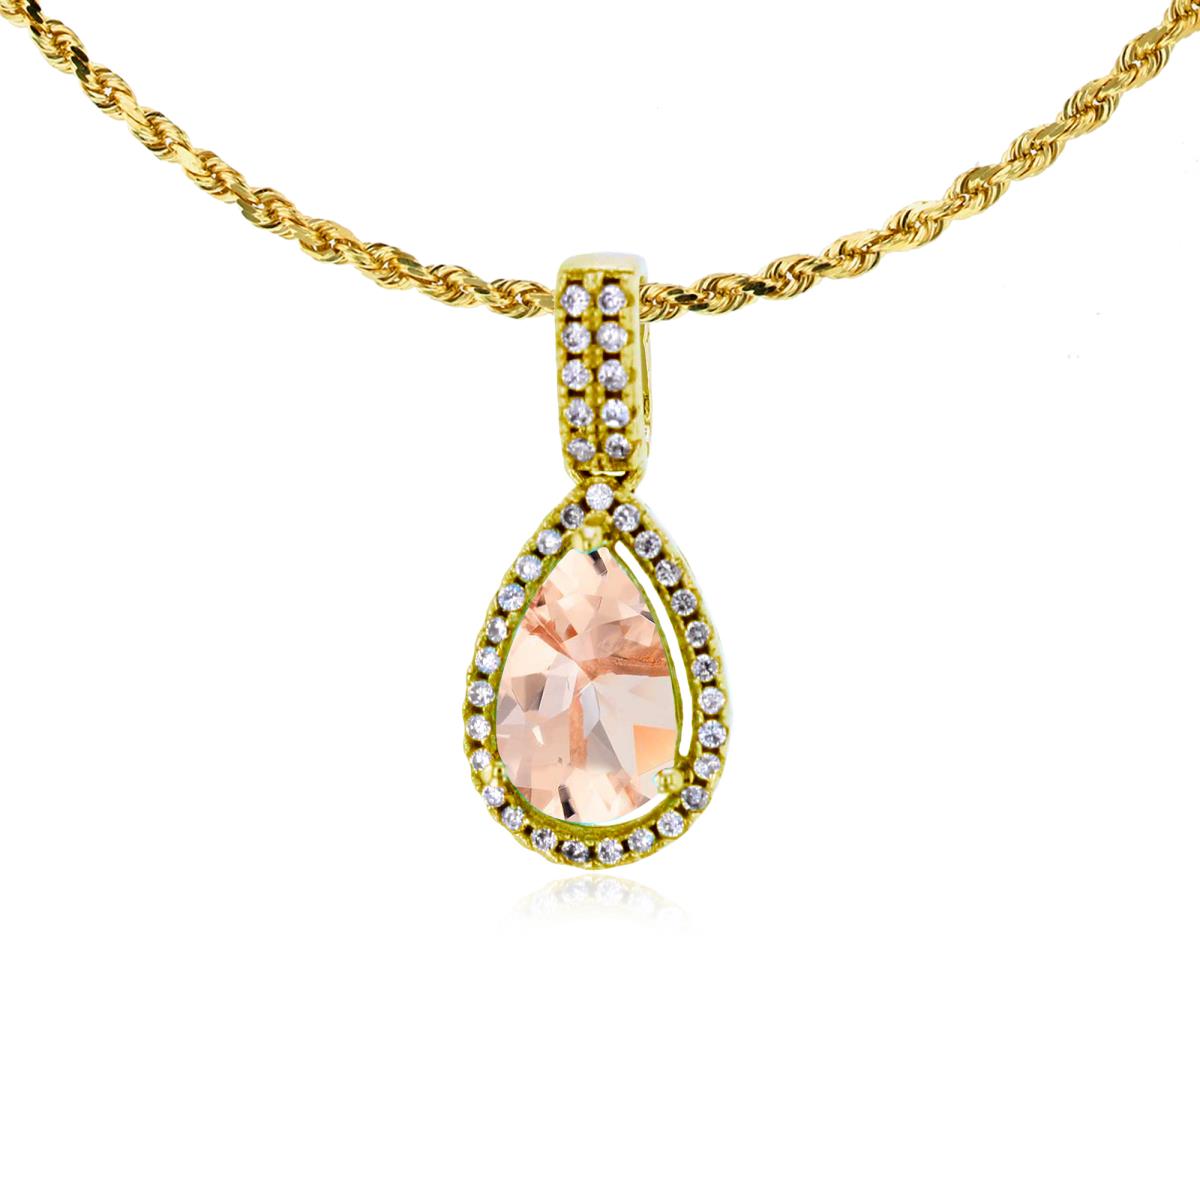 10K Yellow Gold 8x5mm Pear Cut Morganite & 0.11 CTTW Diamond Halo 18" Rope Chain Necklace